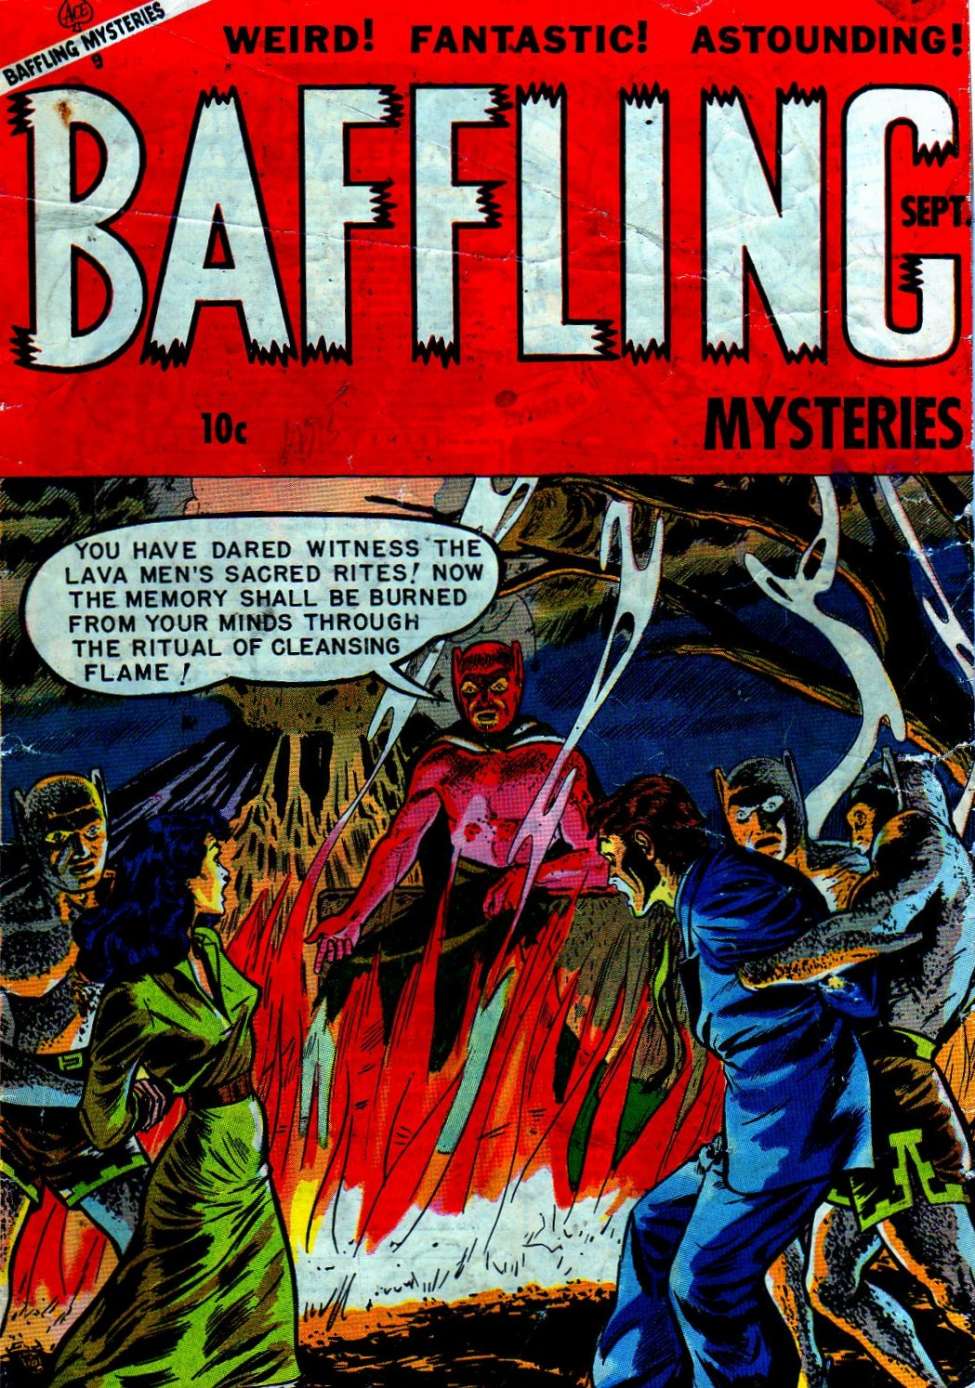 Book Cover For Baffling Mysteries 17